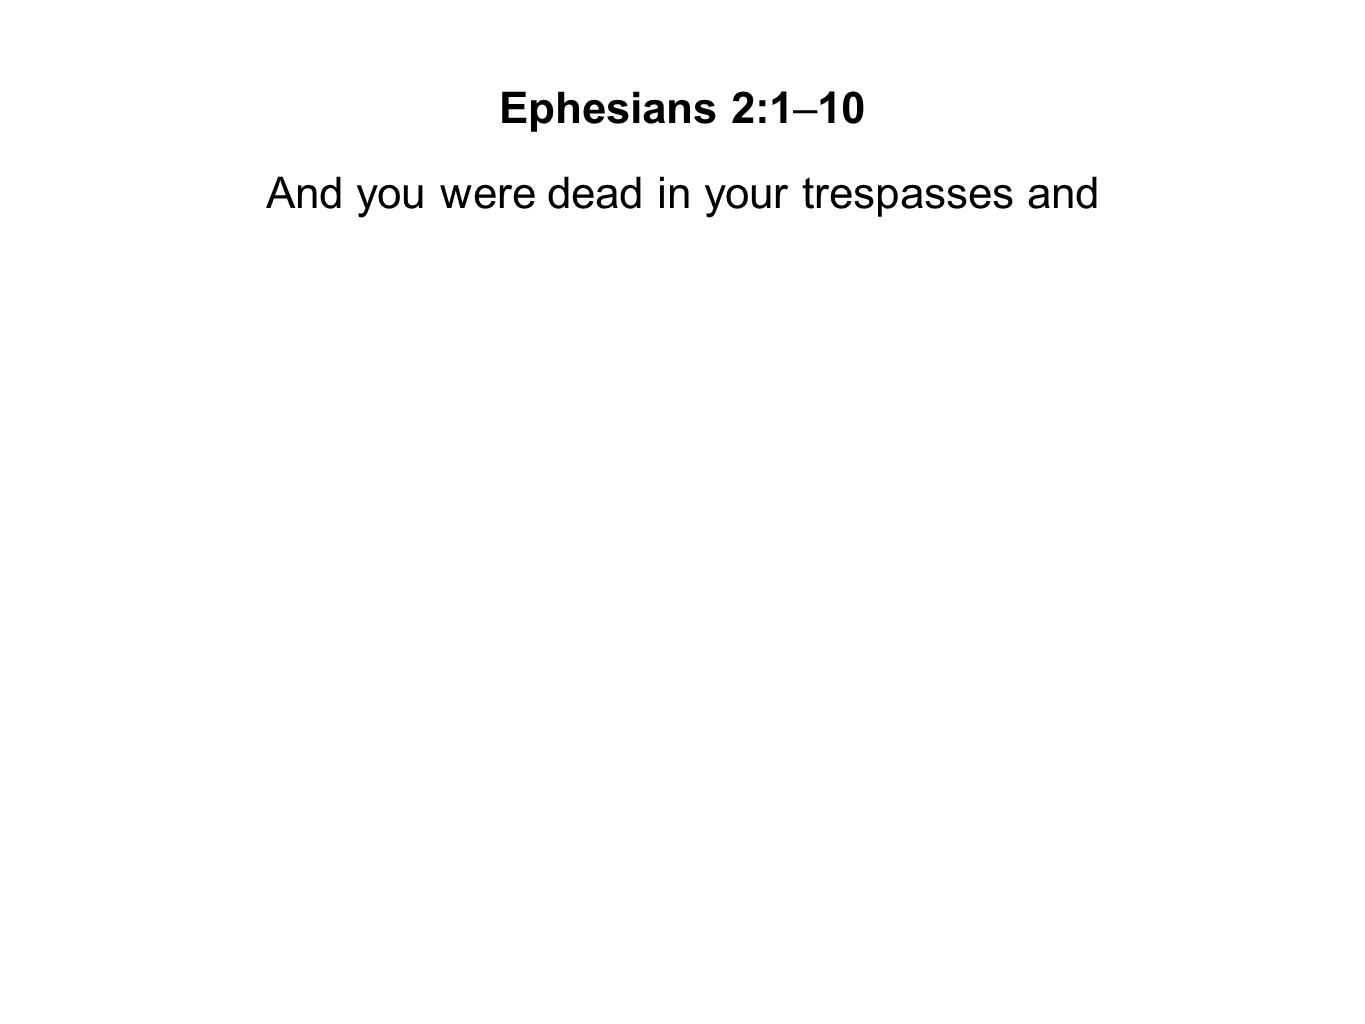 And you were dead in your trespasses and